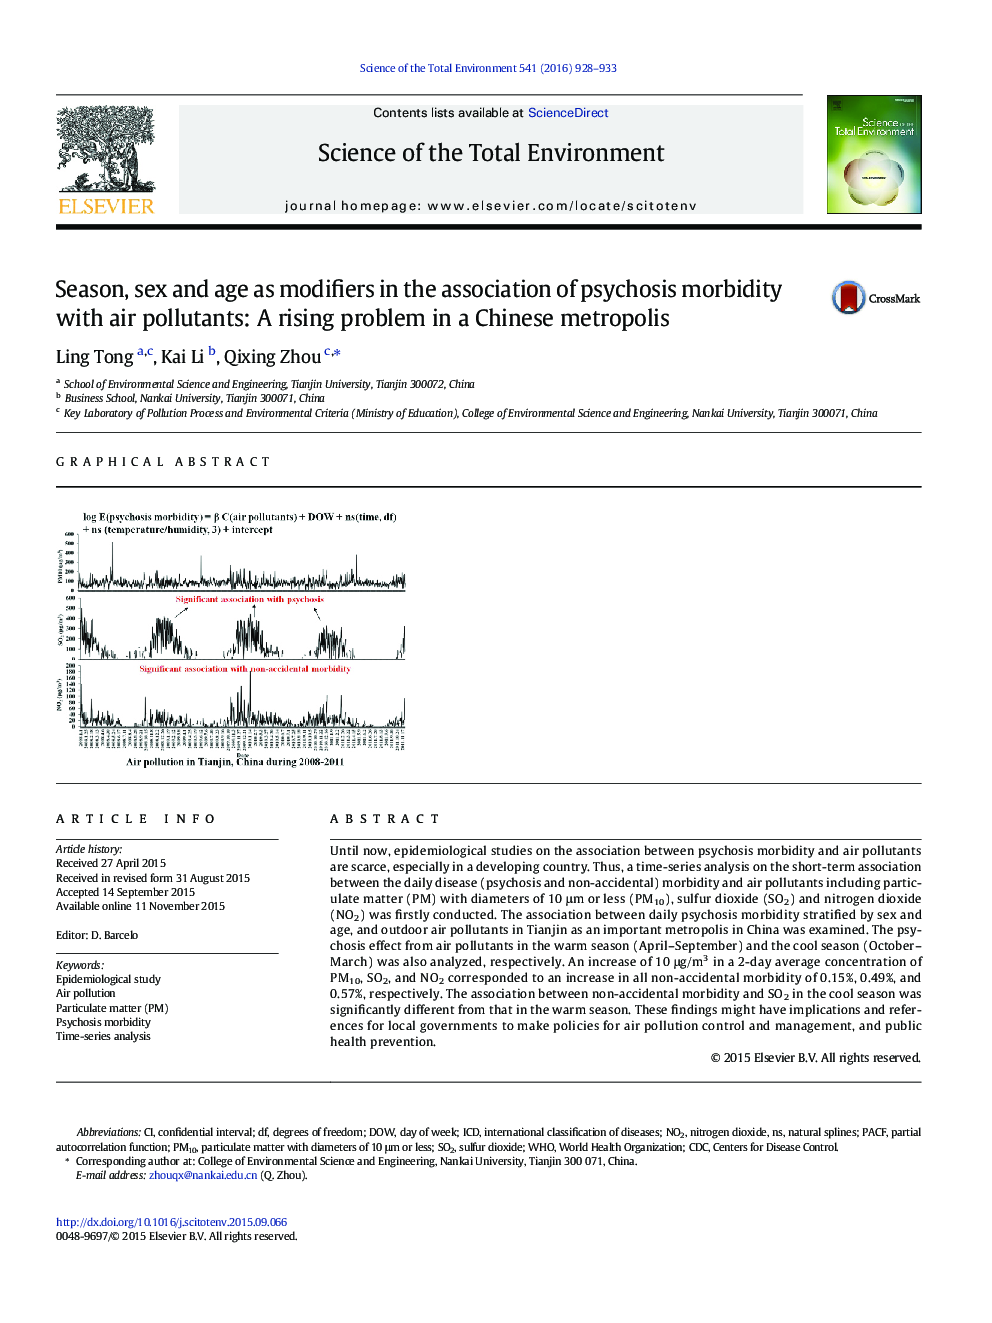 Season, sex and age as modifiers in the association of psychosis morbidity with air pollutants: A rising problem in a Chinese metropolis